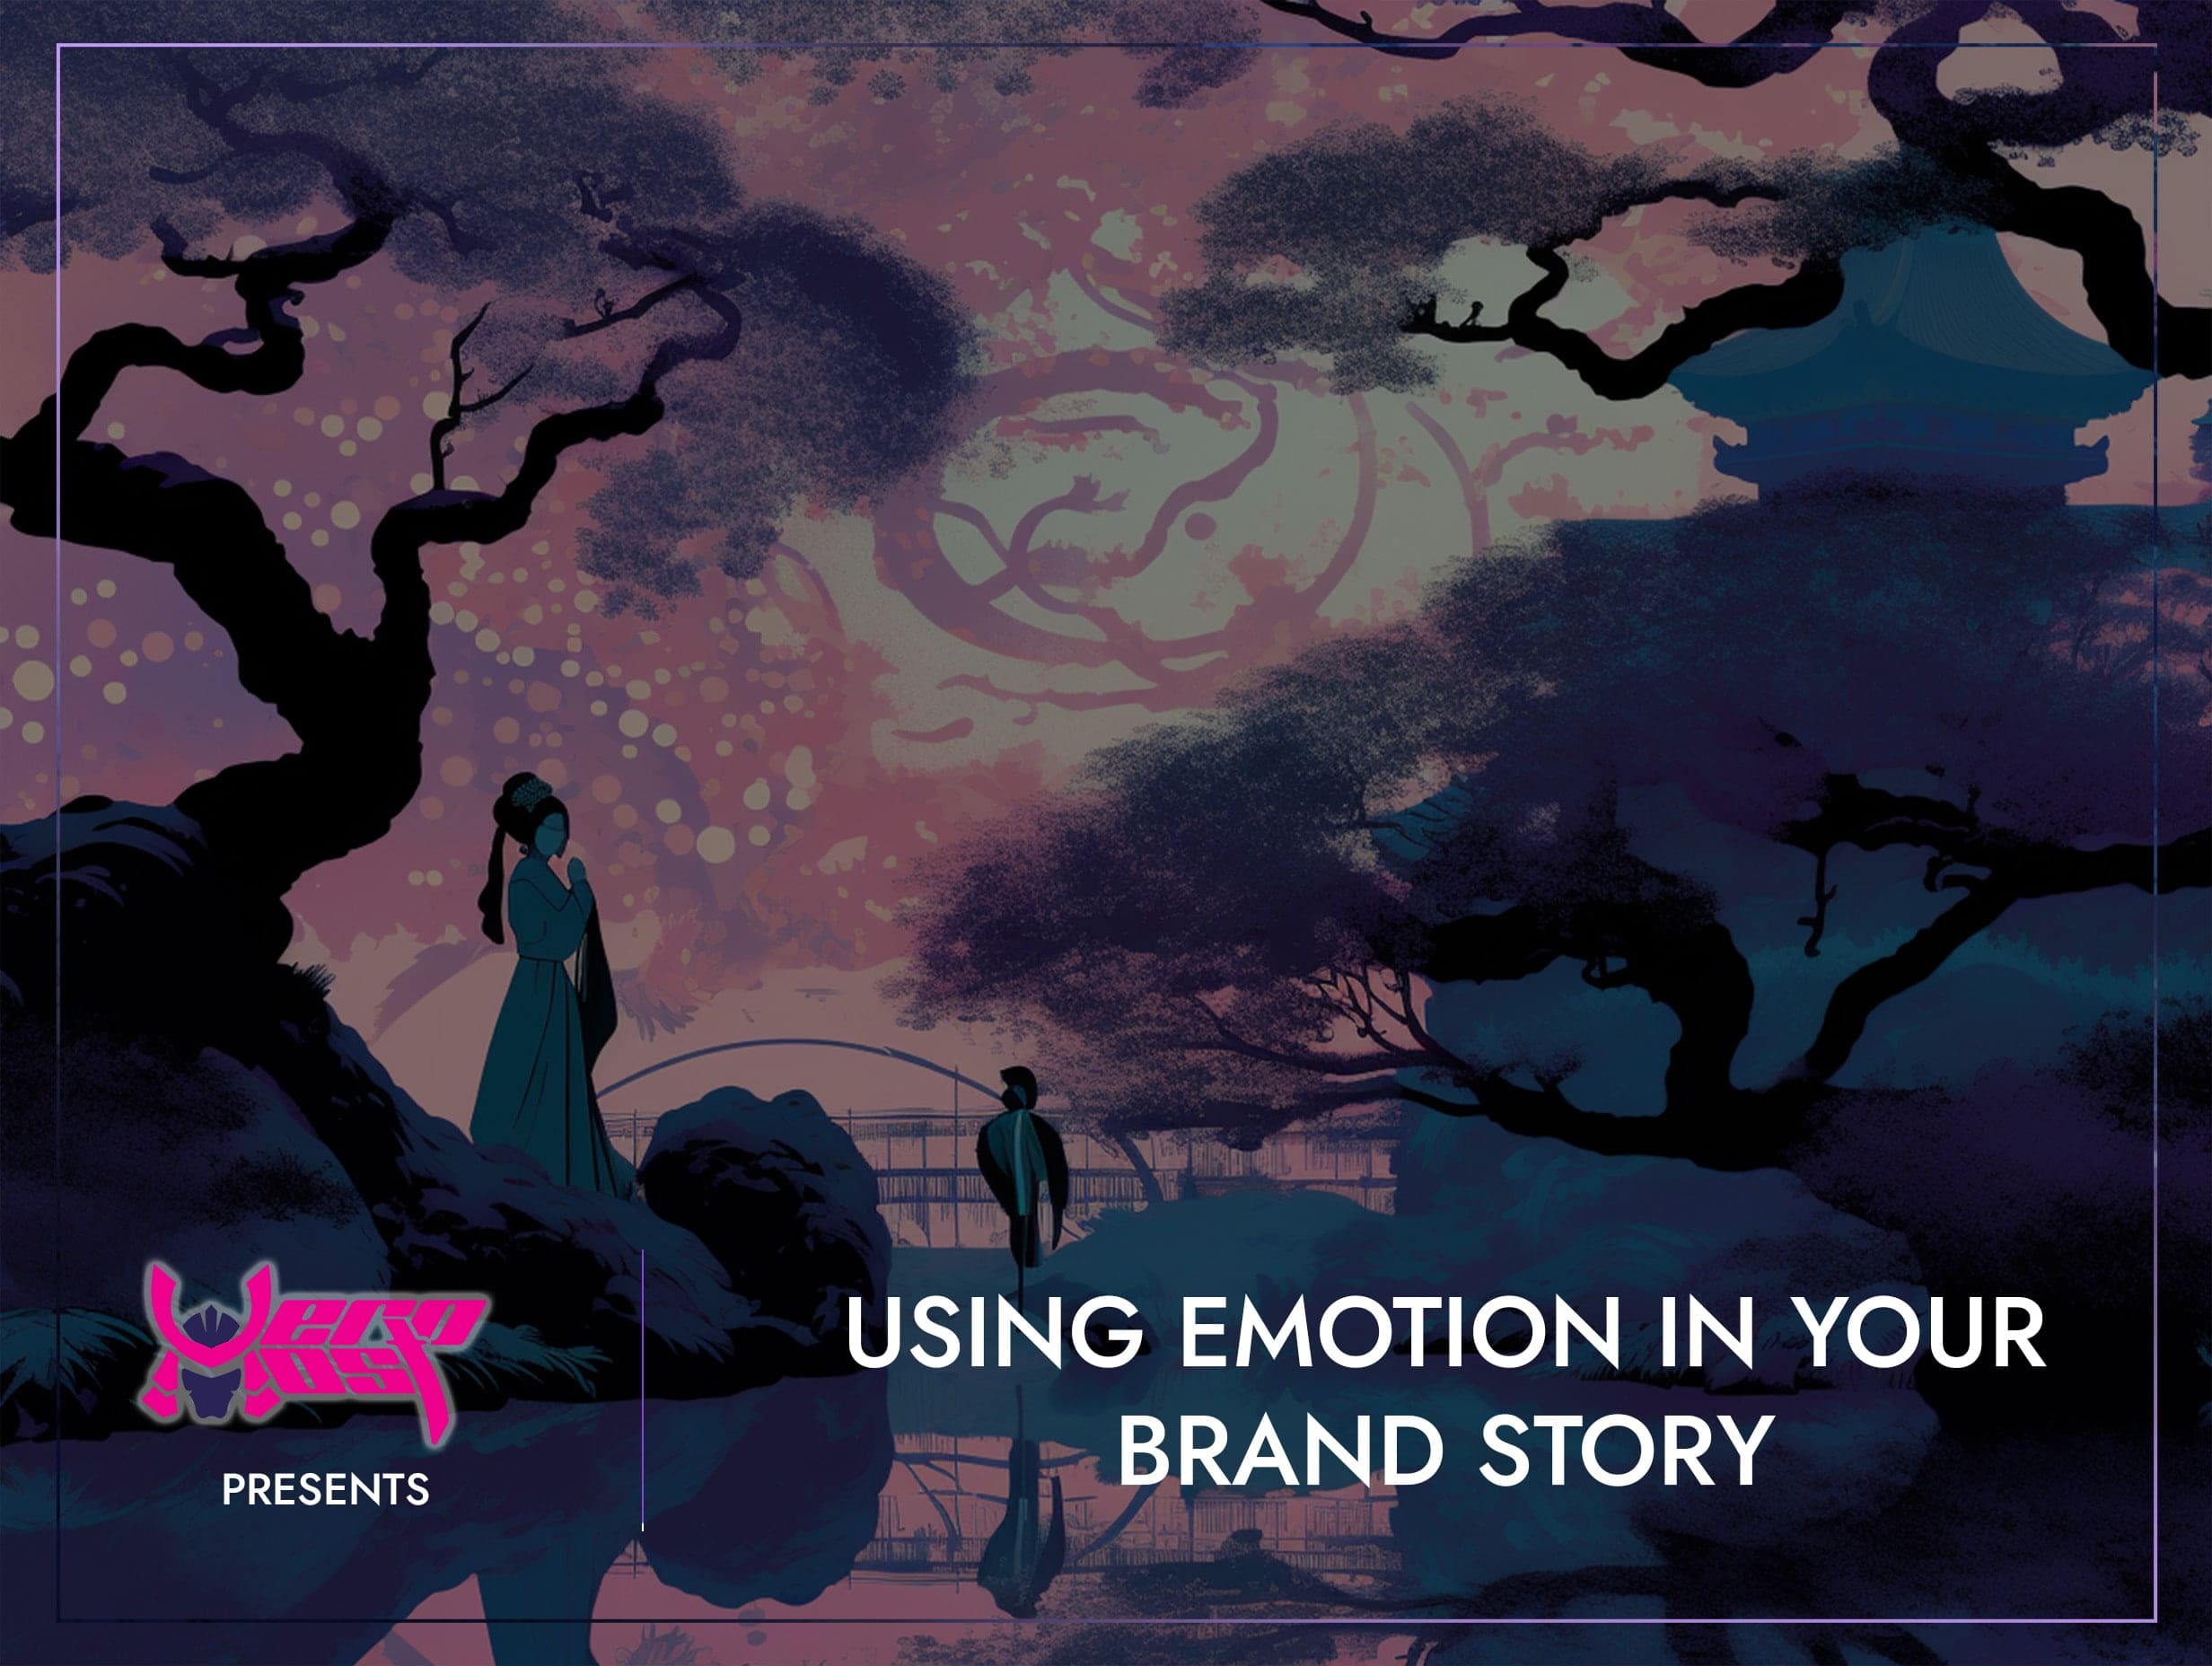 Using emotion in your brand